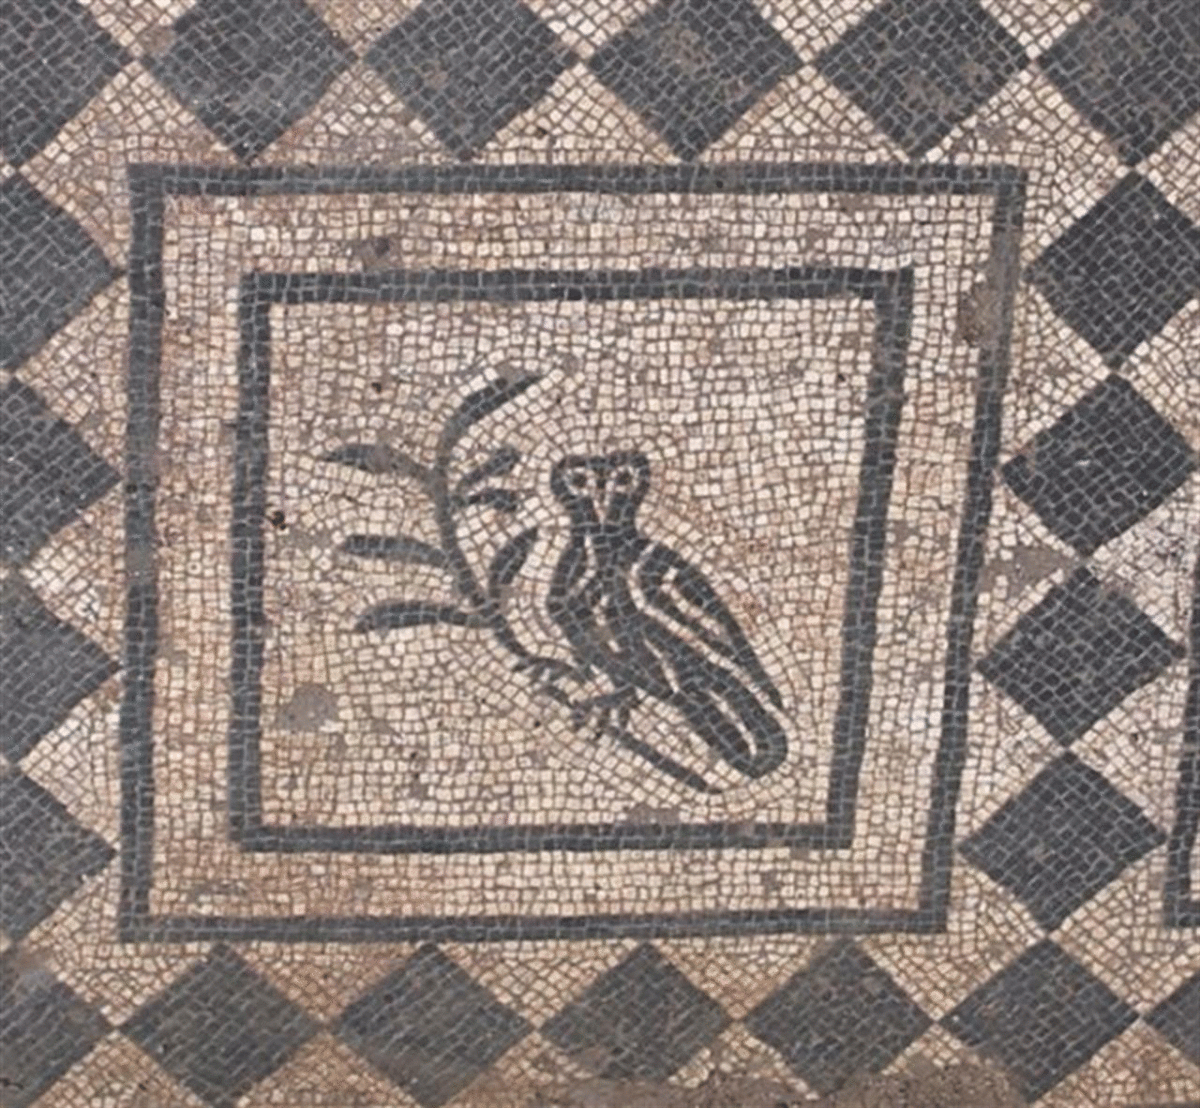 A detail from a mosaic depicting an owl. Photo Credit: Soprintendenza Speciale Archeologia Belle Arti e Paessaggio di Roma/The History Blog.